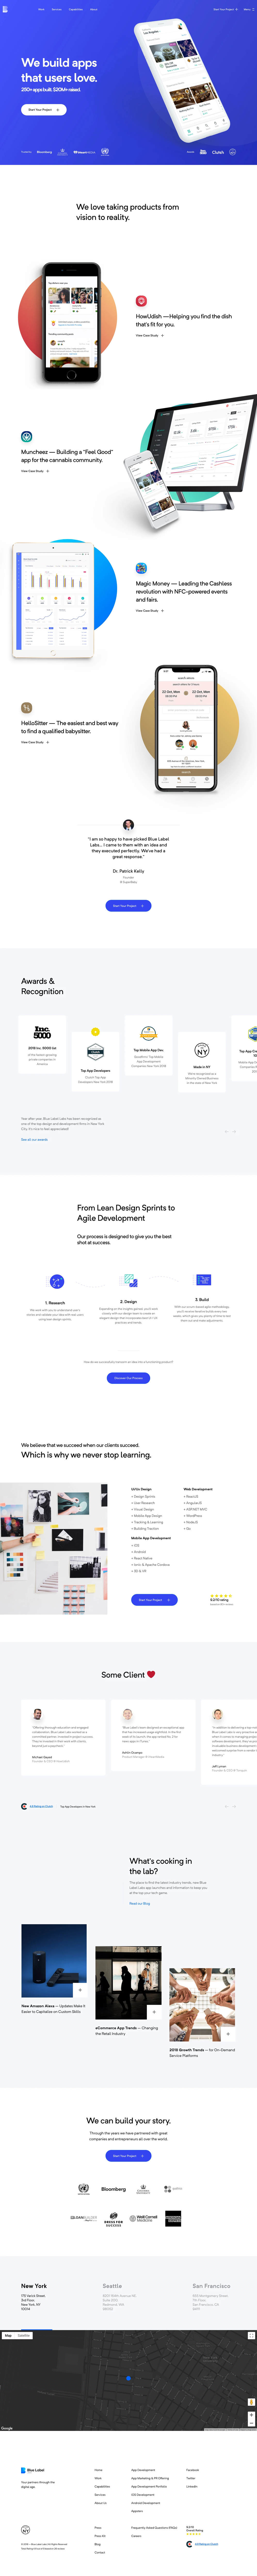 Blue Label Labs Landing Page Example: We are a product creation agency. We can help with the design, development & marketing of mobile, tablet, watch, TV, AR, VR, IoT and web apps.